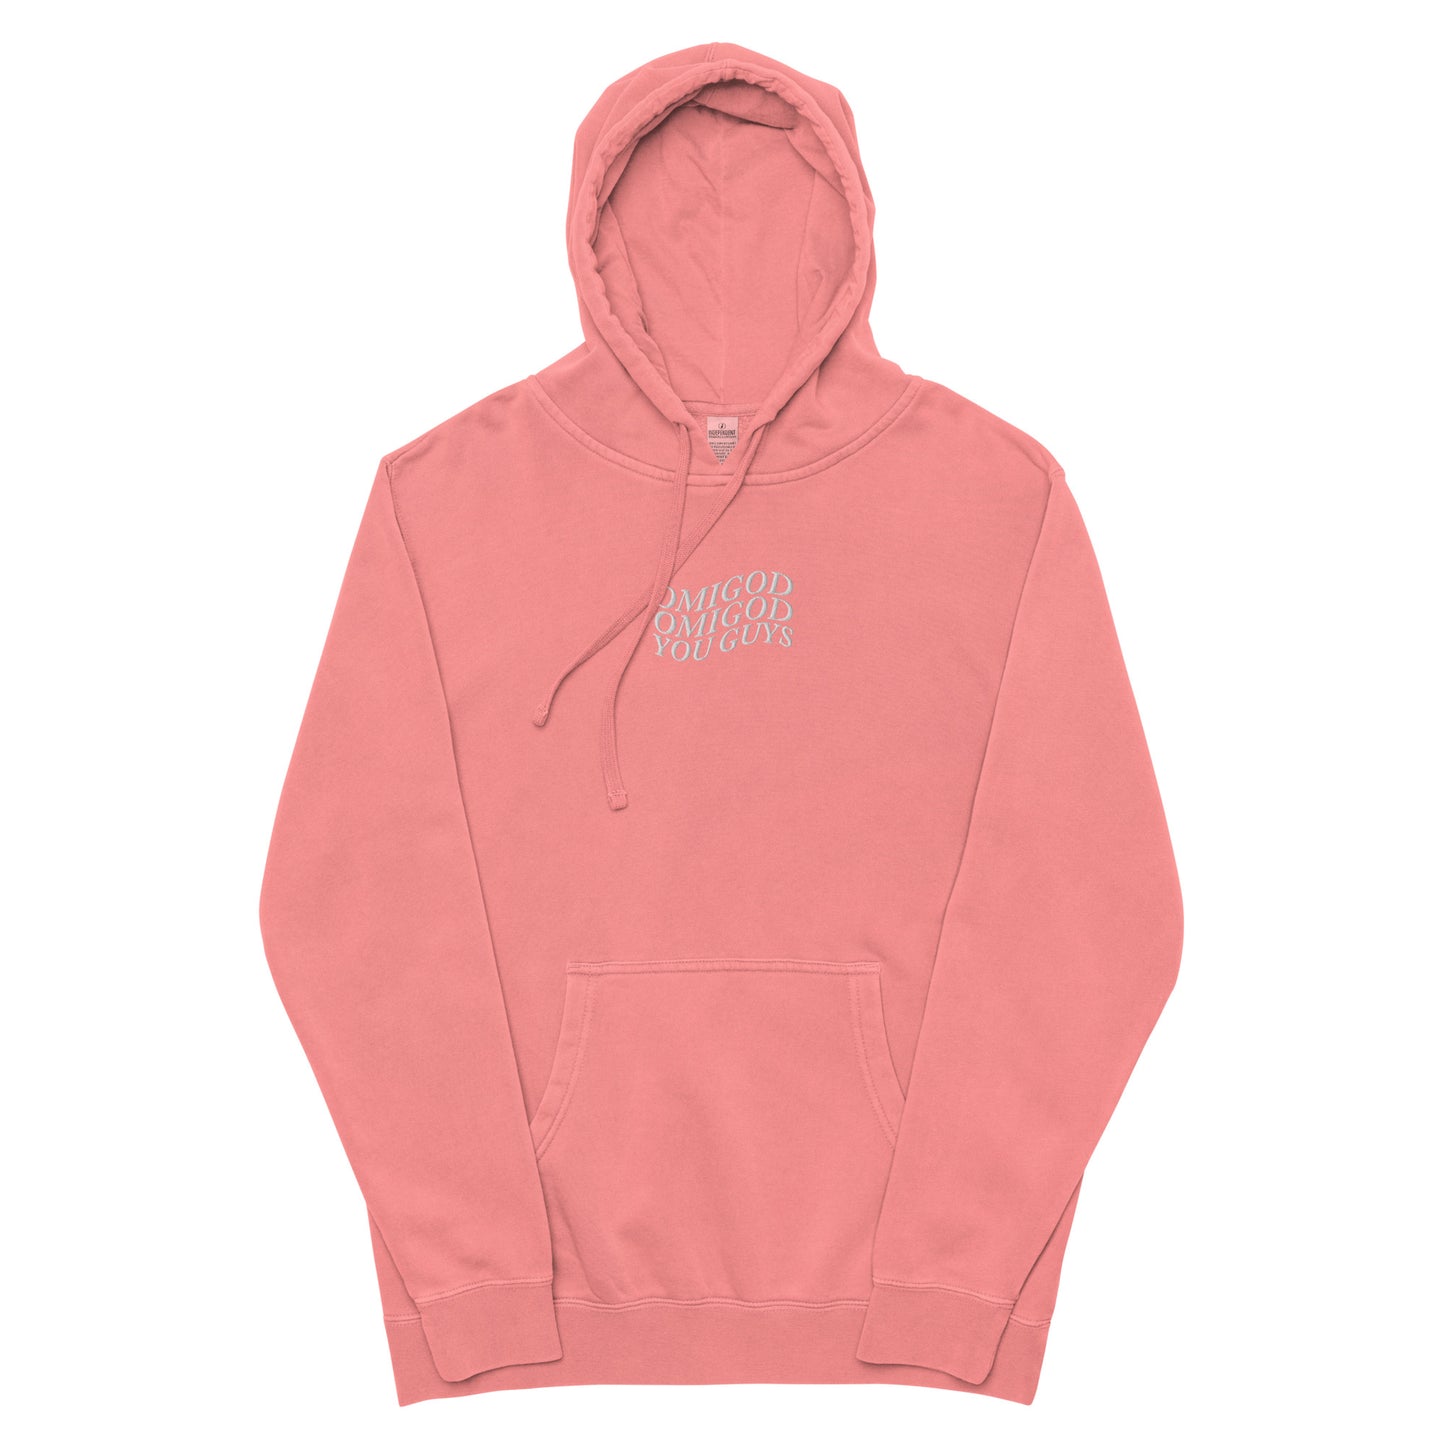 OMG Word Wave Embroidered Pigment-Dyed Hoodie